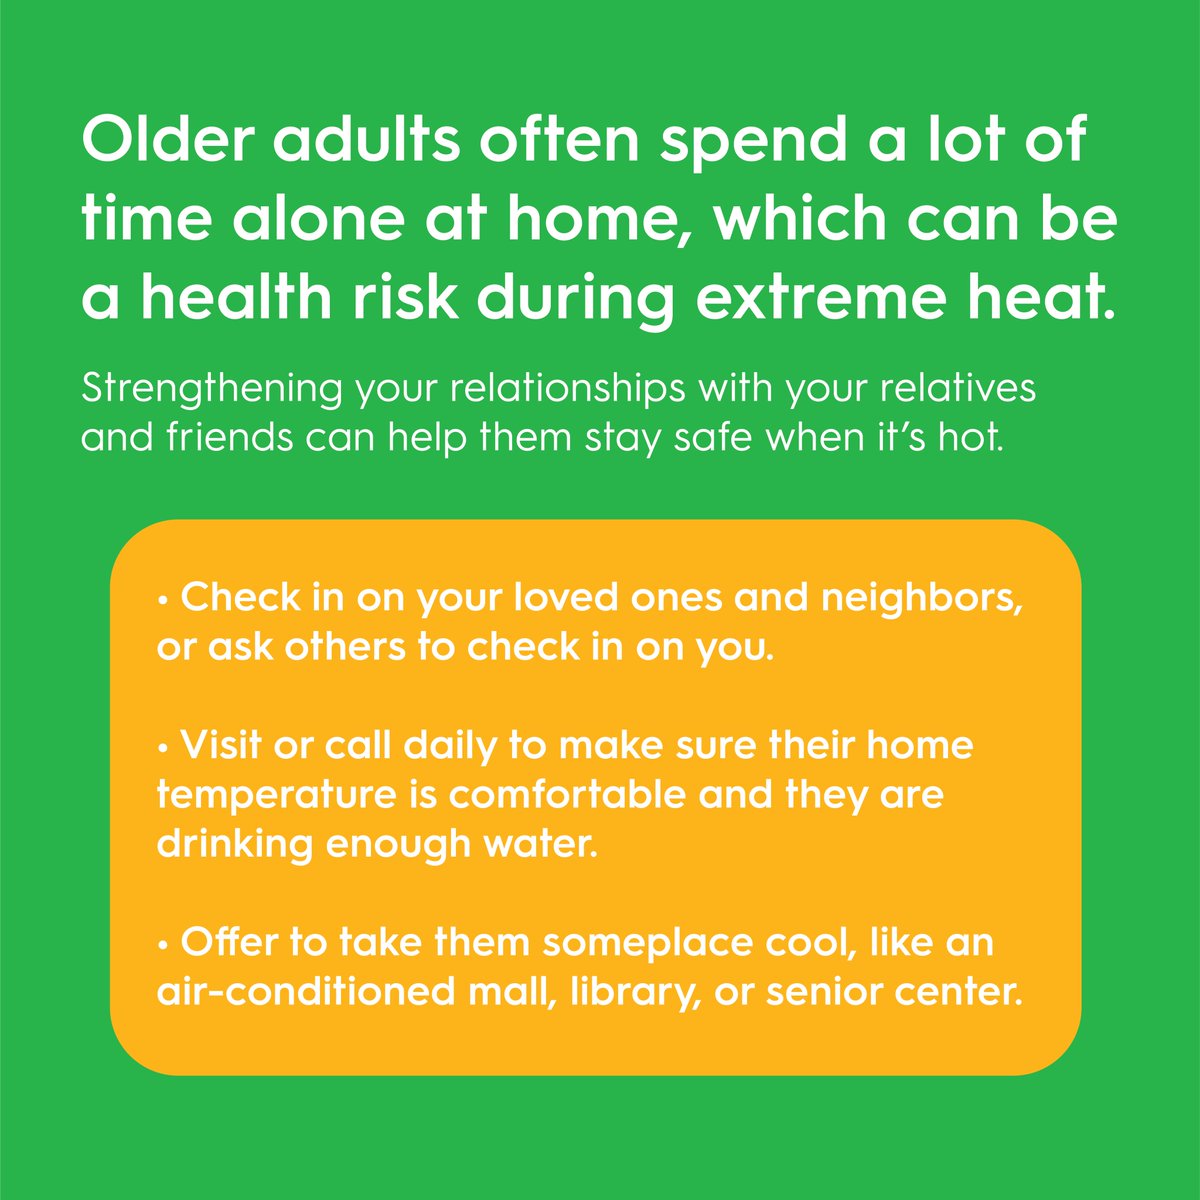 Older adults are at higher risk from extreme heat. Here are some tips to keep yourself and older adults in your life cool and healthy when it’s hot. #HeatSafeLA #HeatRelief4LA #CAwx #LAHeat